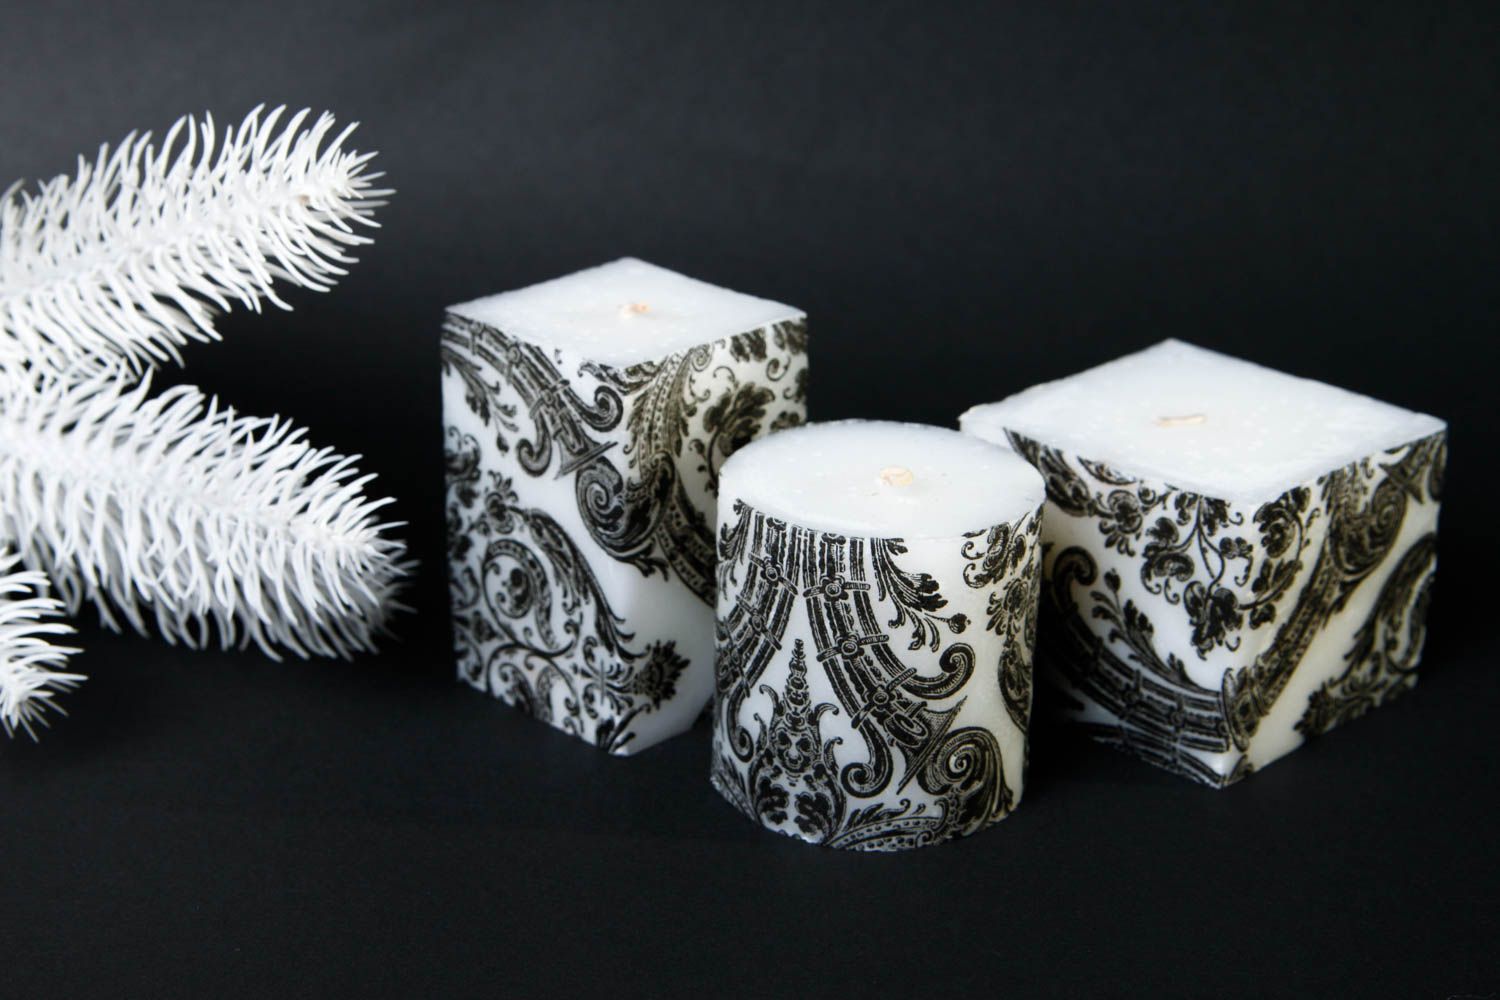 Beautiful handmade paraffin candles 3 pieces interior decorating small gifts photo 1